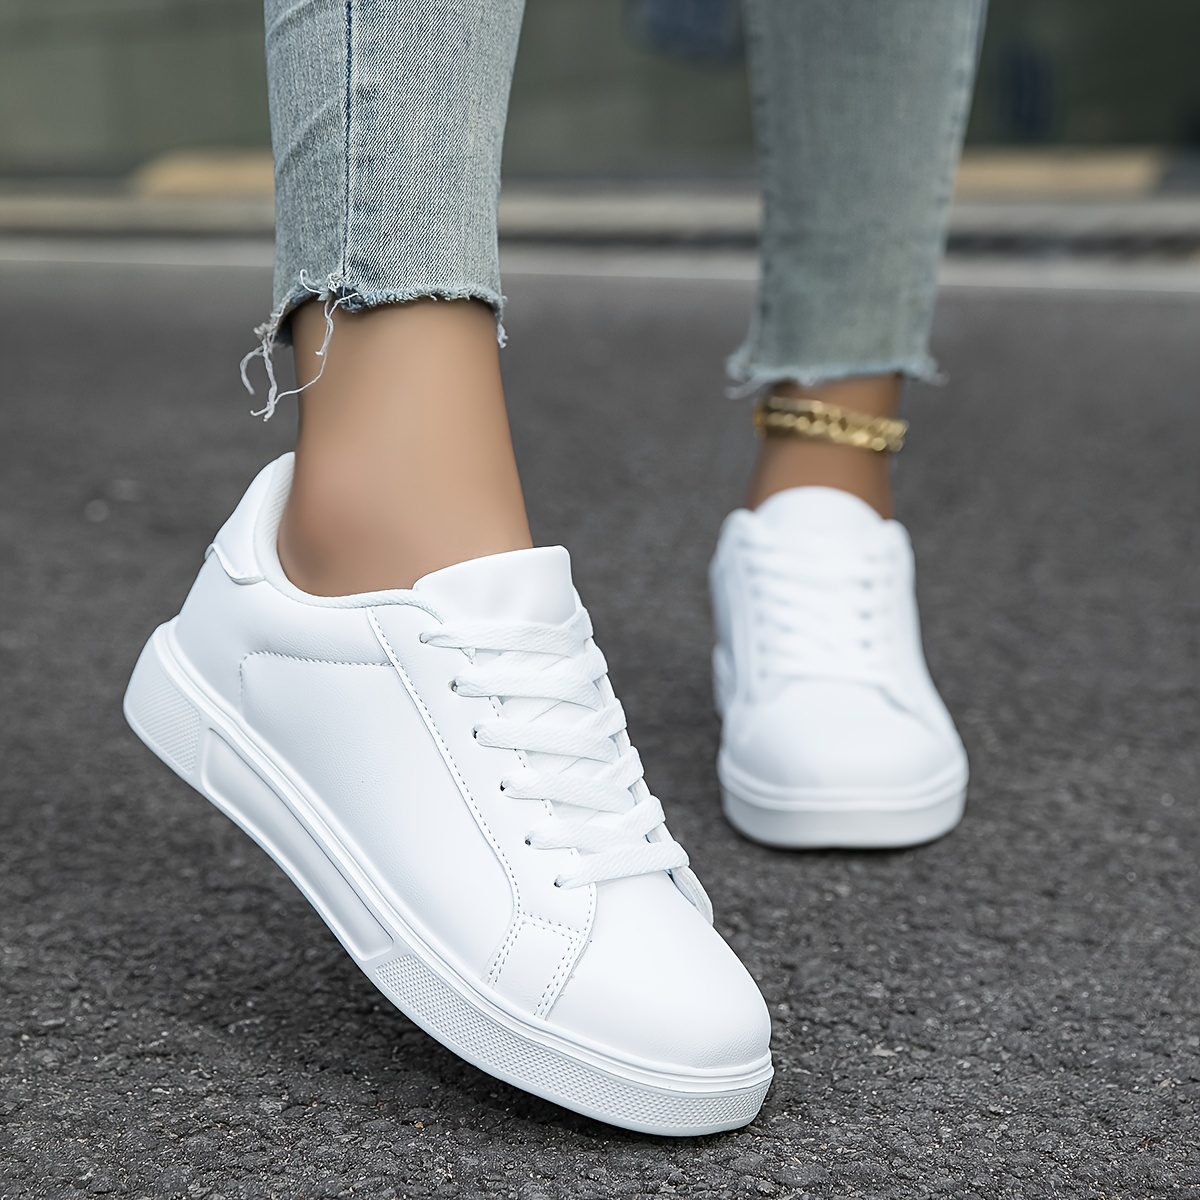 

Women's White Skate Shoes, Versatile Lace Up Low Top Flat Sneakers, Casual Outdoor Walking Trainers